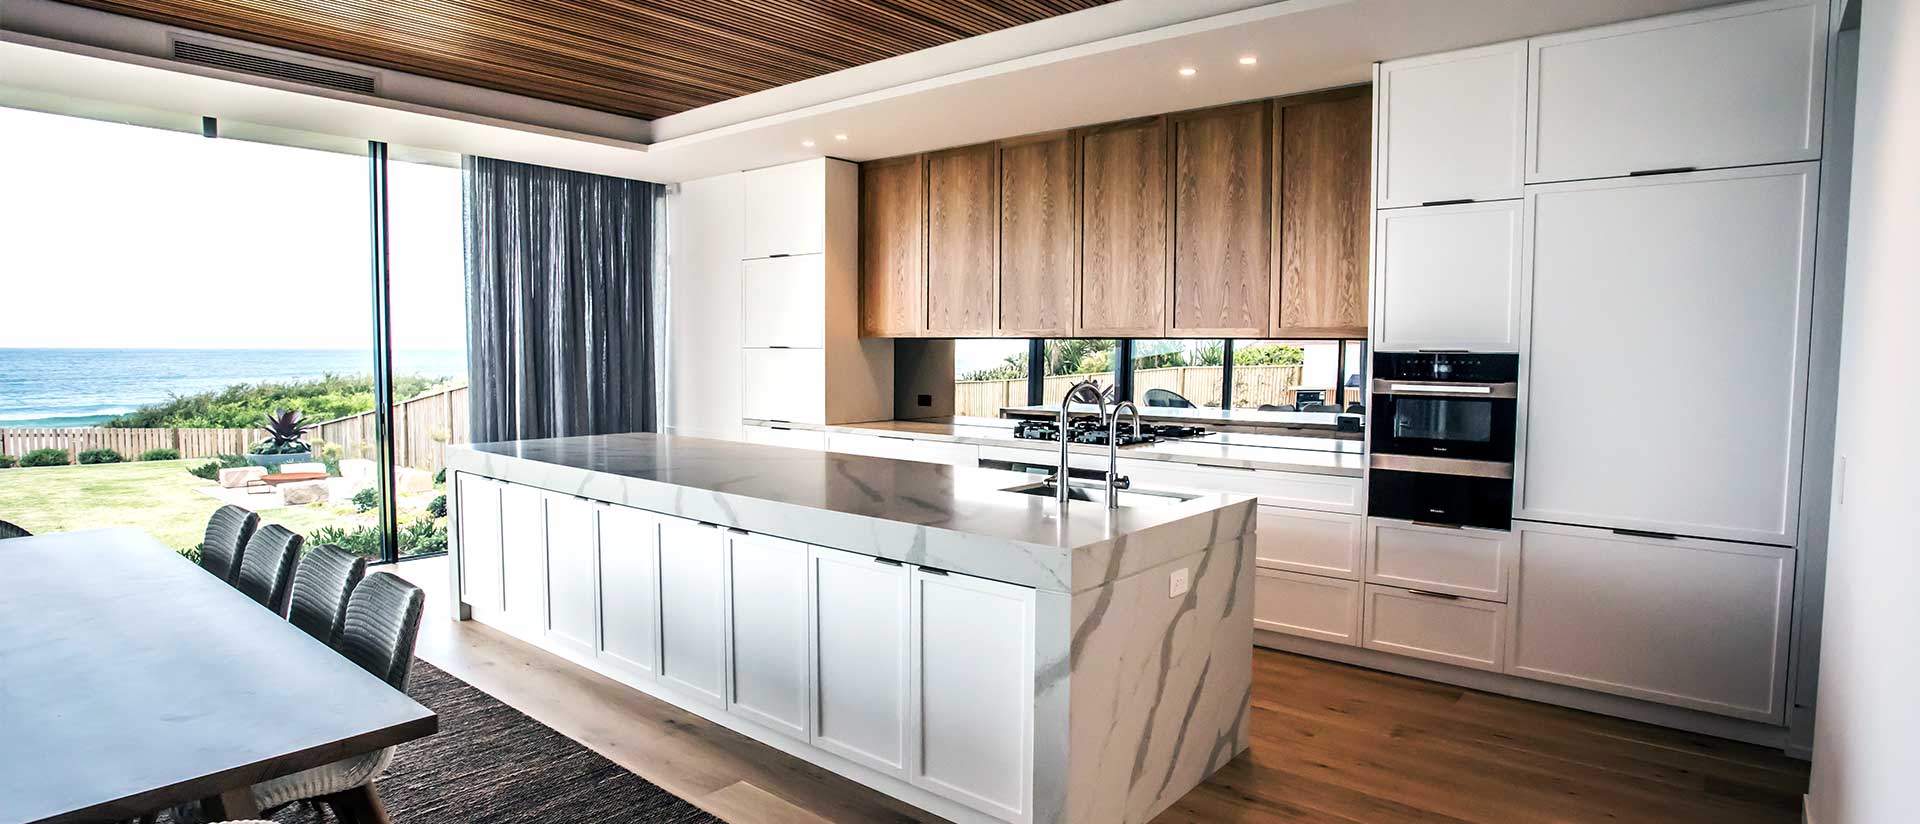 coastal hamptons style kitchen recently installed in Narrabeen